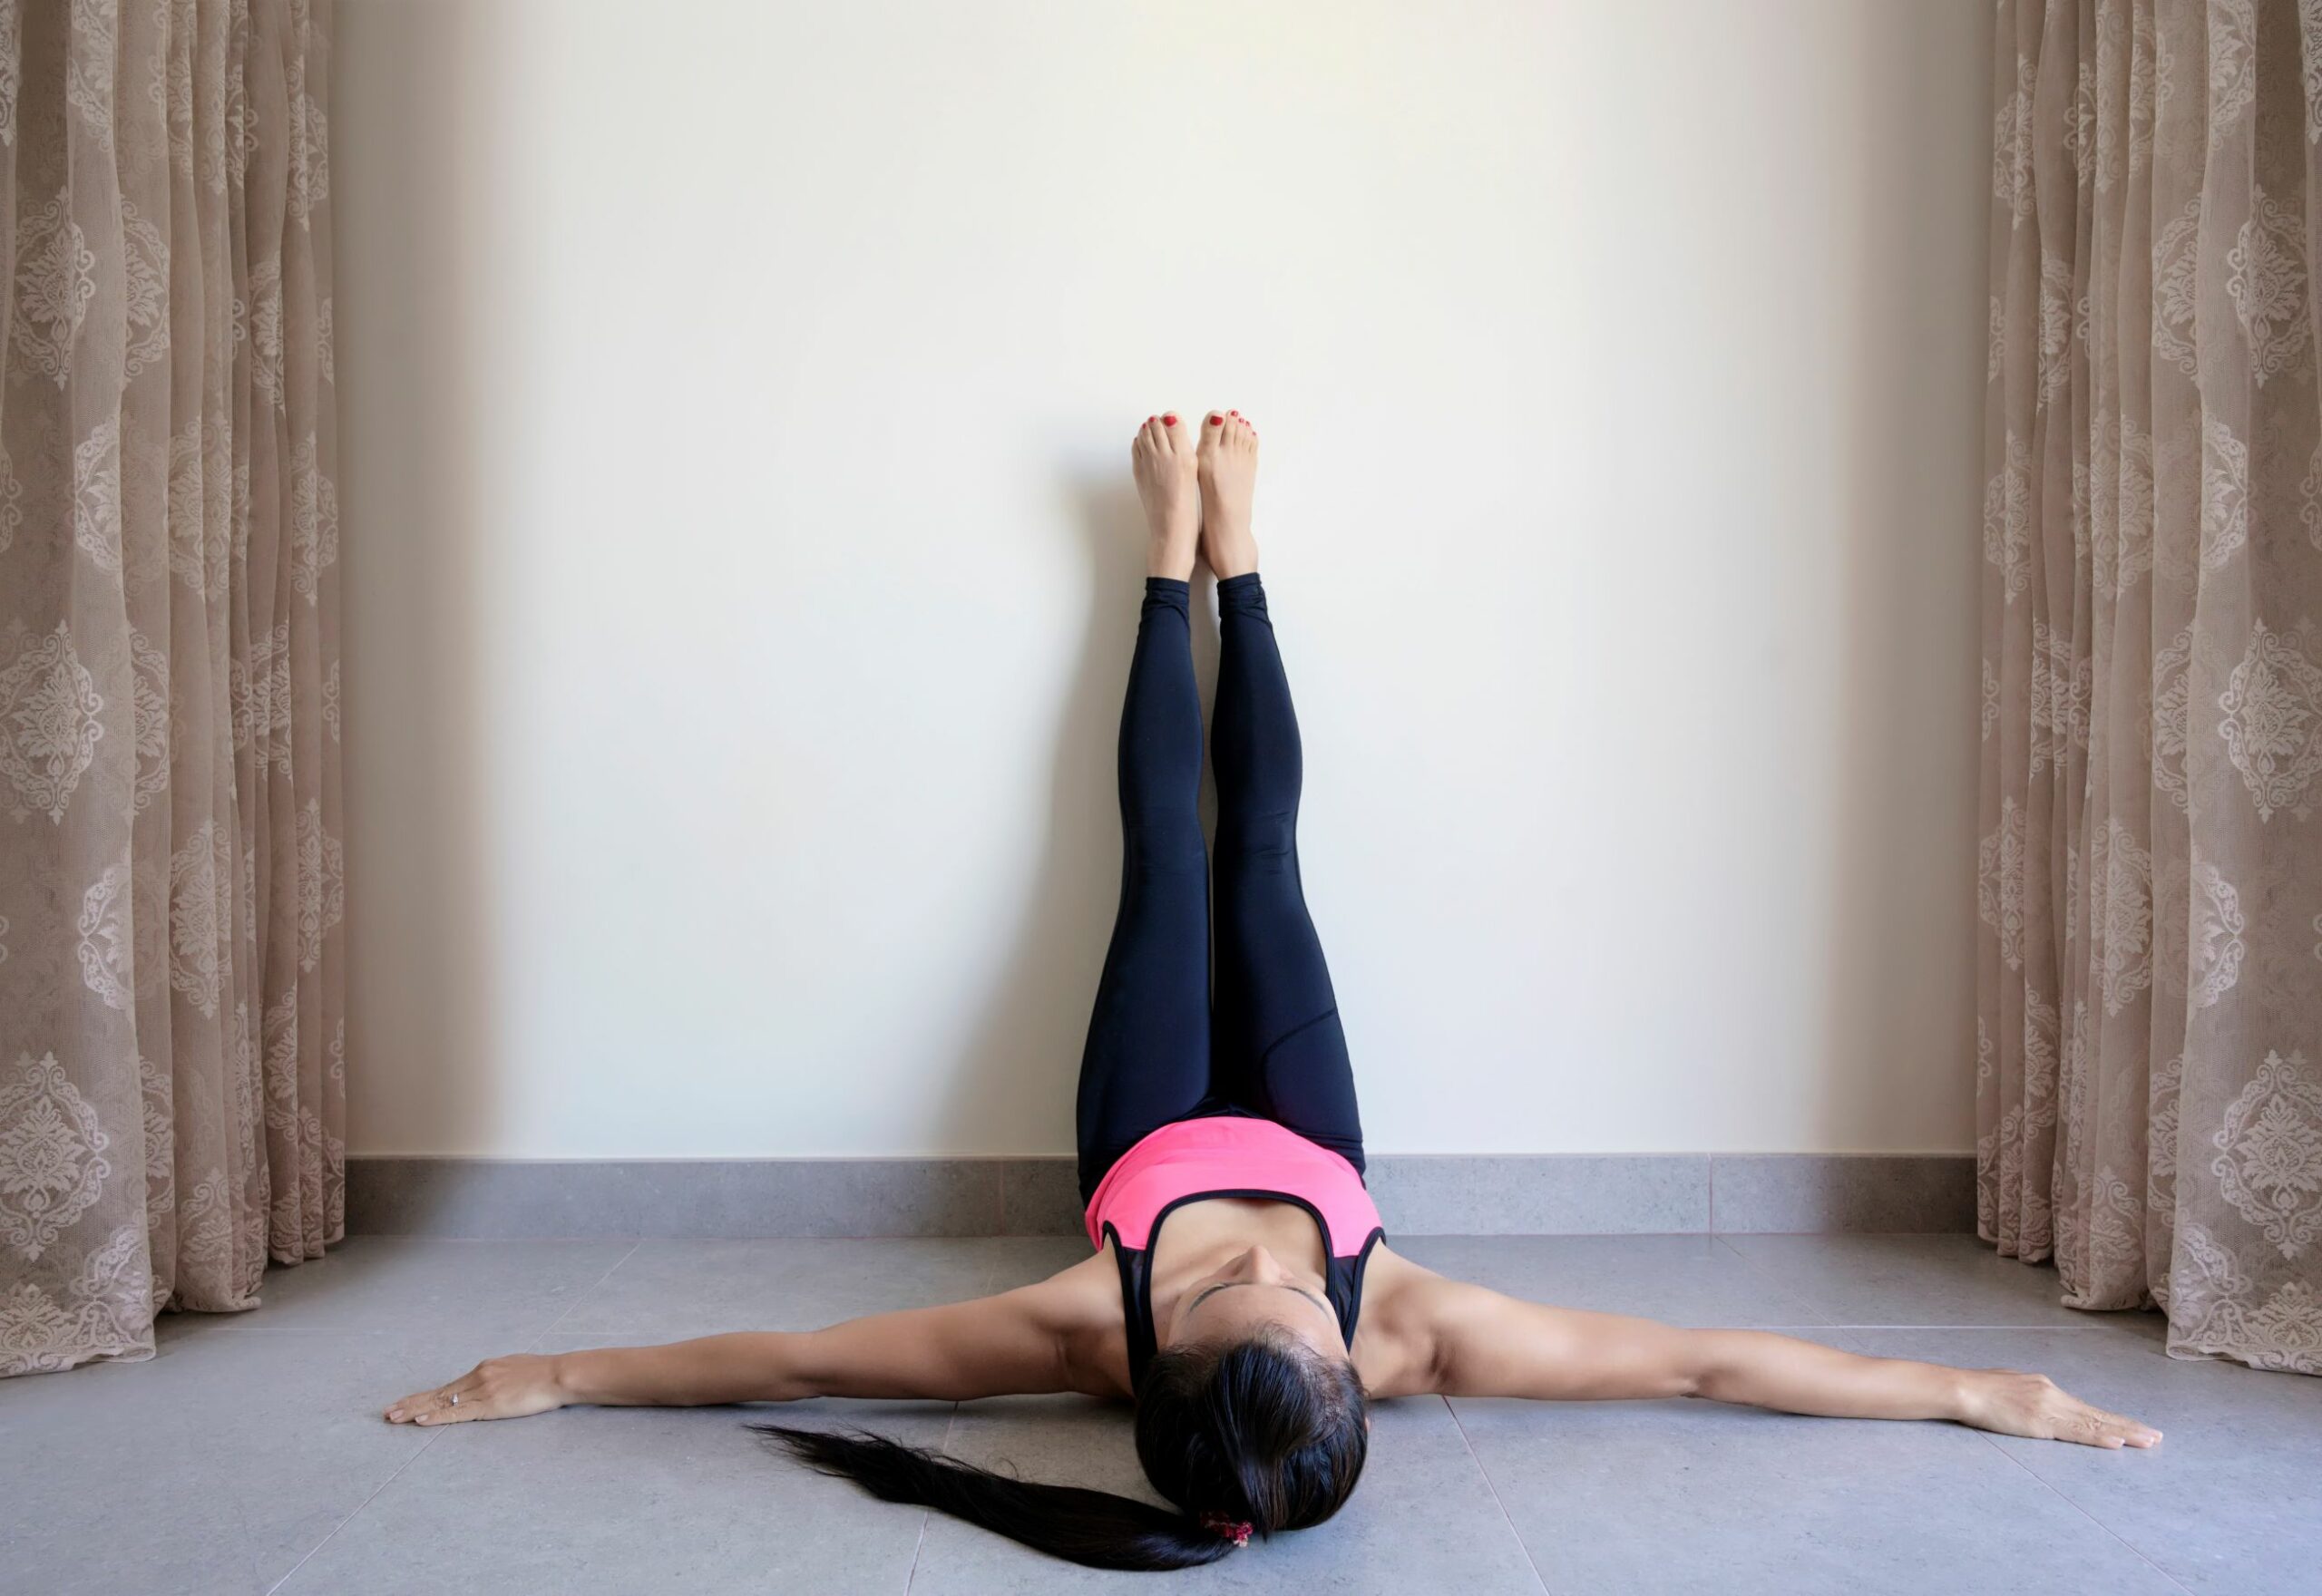 An image of a woman doing the 28 day wall Pilates challenge.